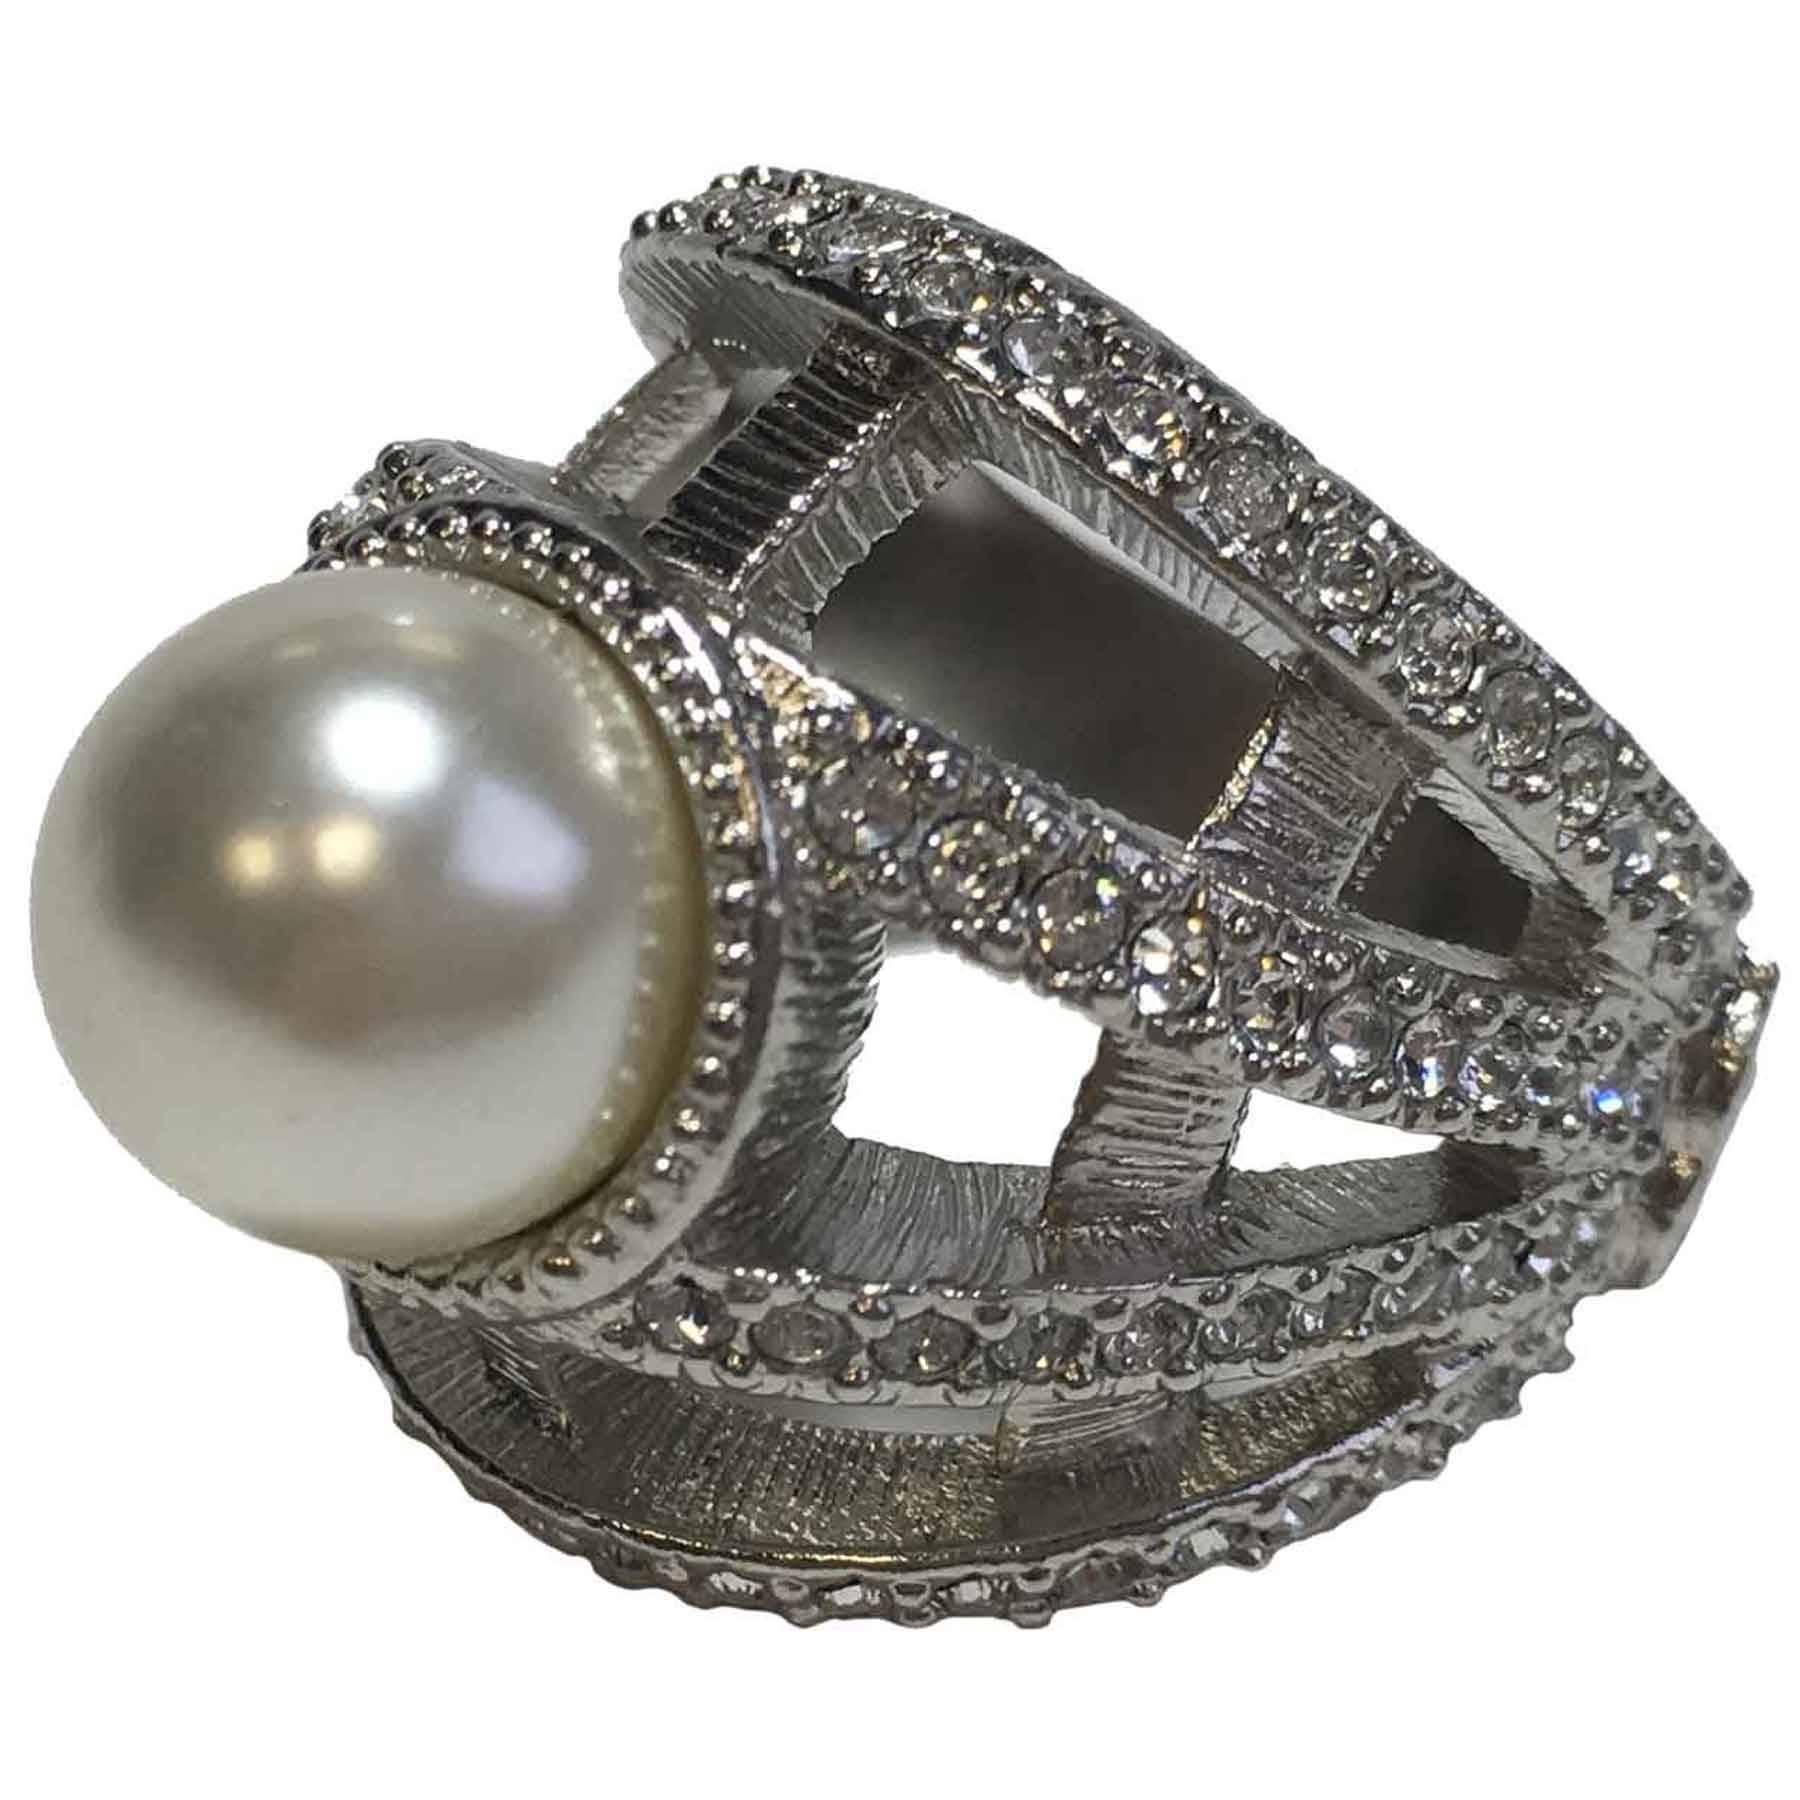 CHANEL 'Jewelry' Ring T54 in Silver Plated Metal, Glass Pearl and Rhinestones